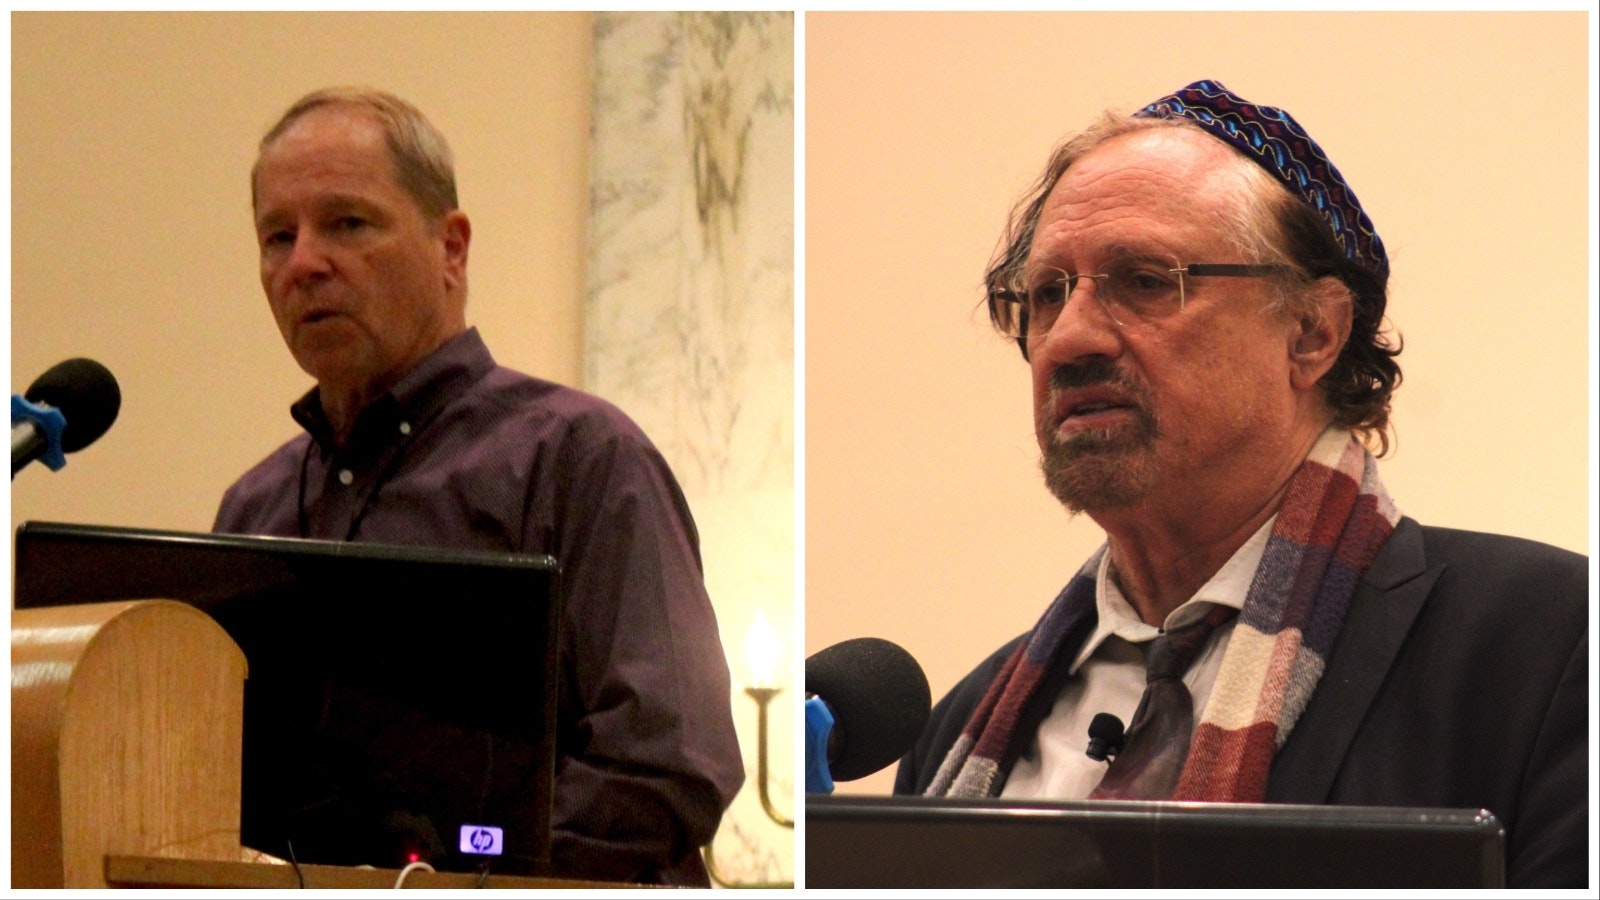 At left, J.R. Atkins, preacher at Grace United Methodist Church and United Methodist Church of Pine Bluffs and Rabbi Moshe Halfon of the Mt. Sinai Synagogue speak at Monday's event.